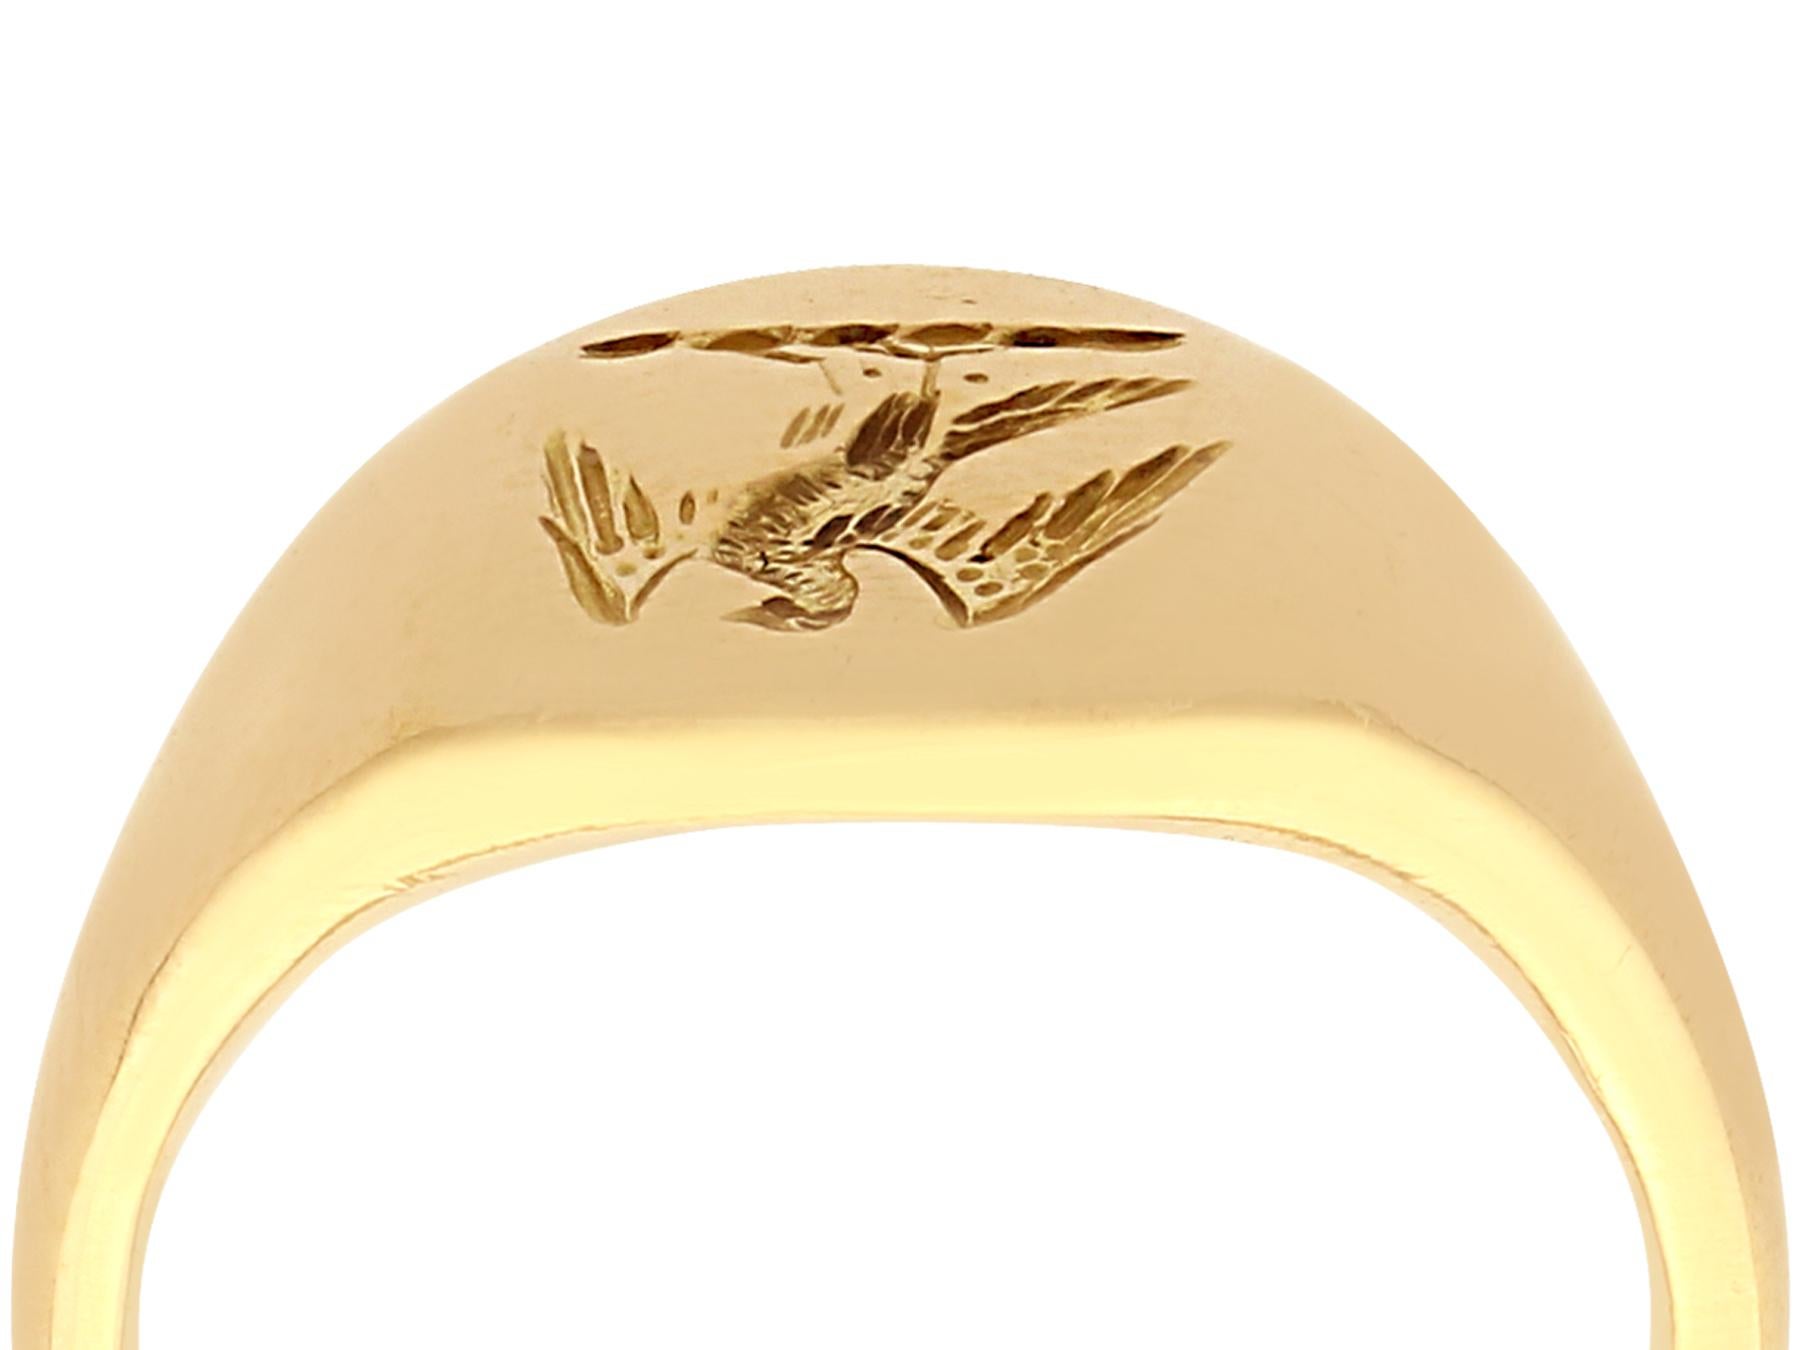 A fine and impressive antique 18 karat yellow gold intaglio signet ring; part our gent's jewelry and estate jewelry collections.

This fine and impressive antique men's signet ring has been crafted in 18k yellow gold.

The circular face of this